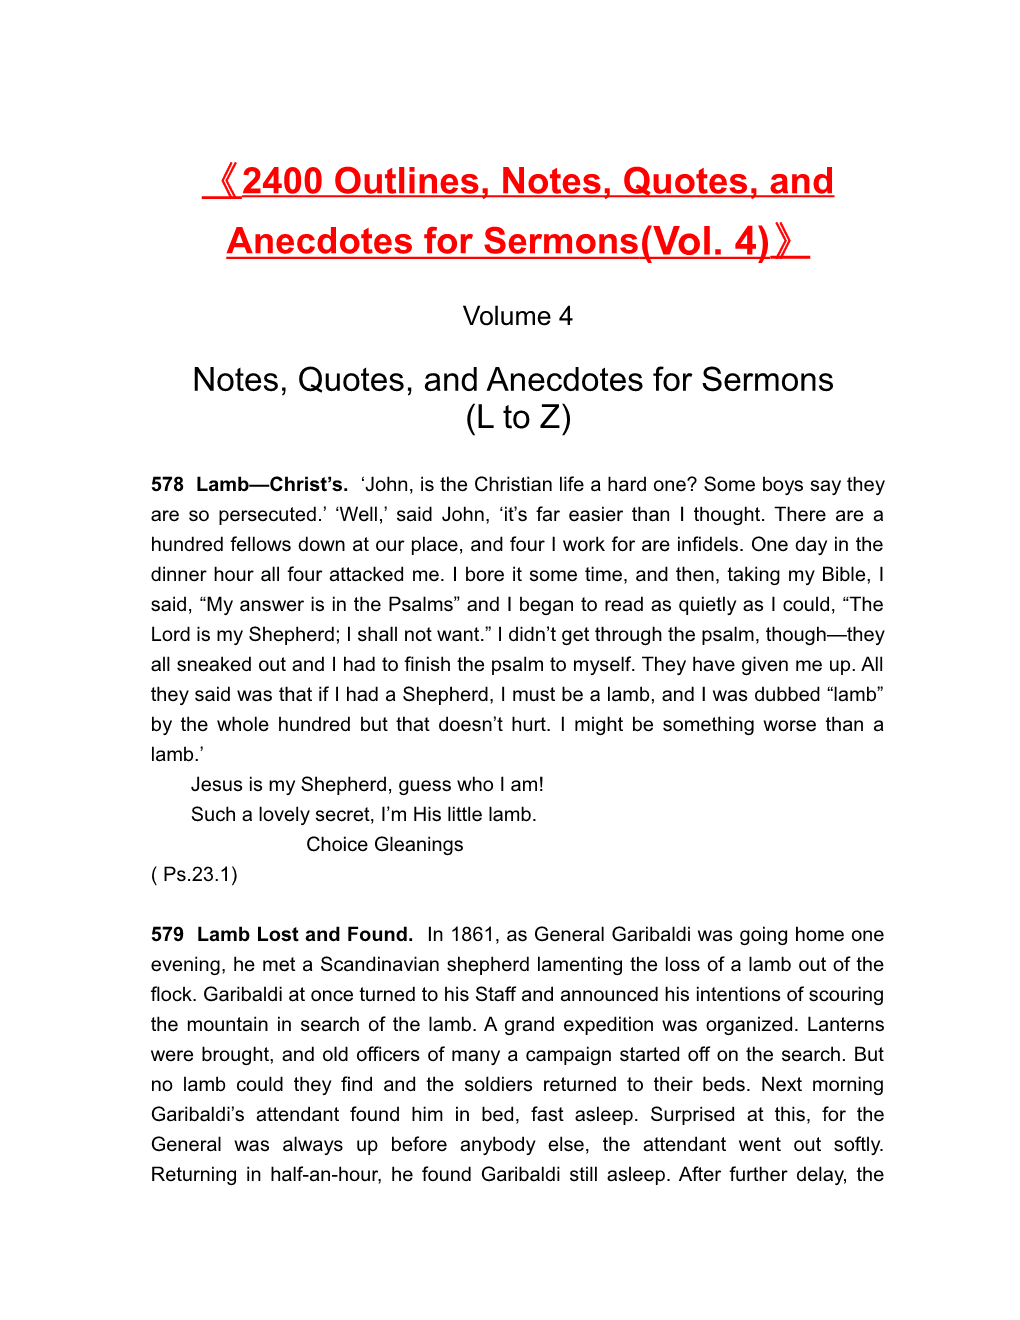 2400 Outlines, Notes, Quotes, and Anecdotes for Sermons(Vol. 4)